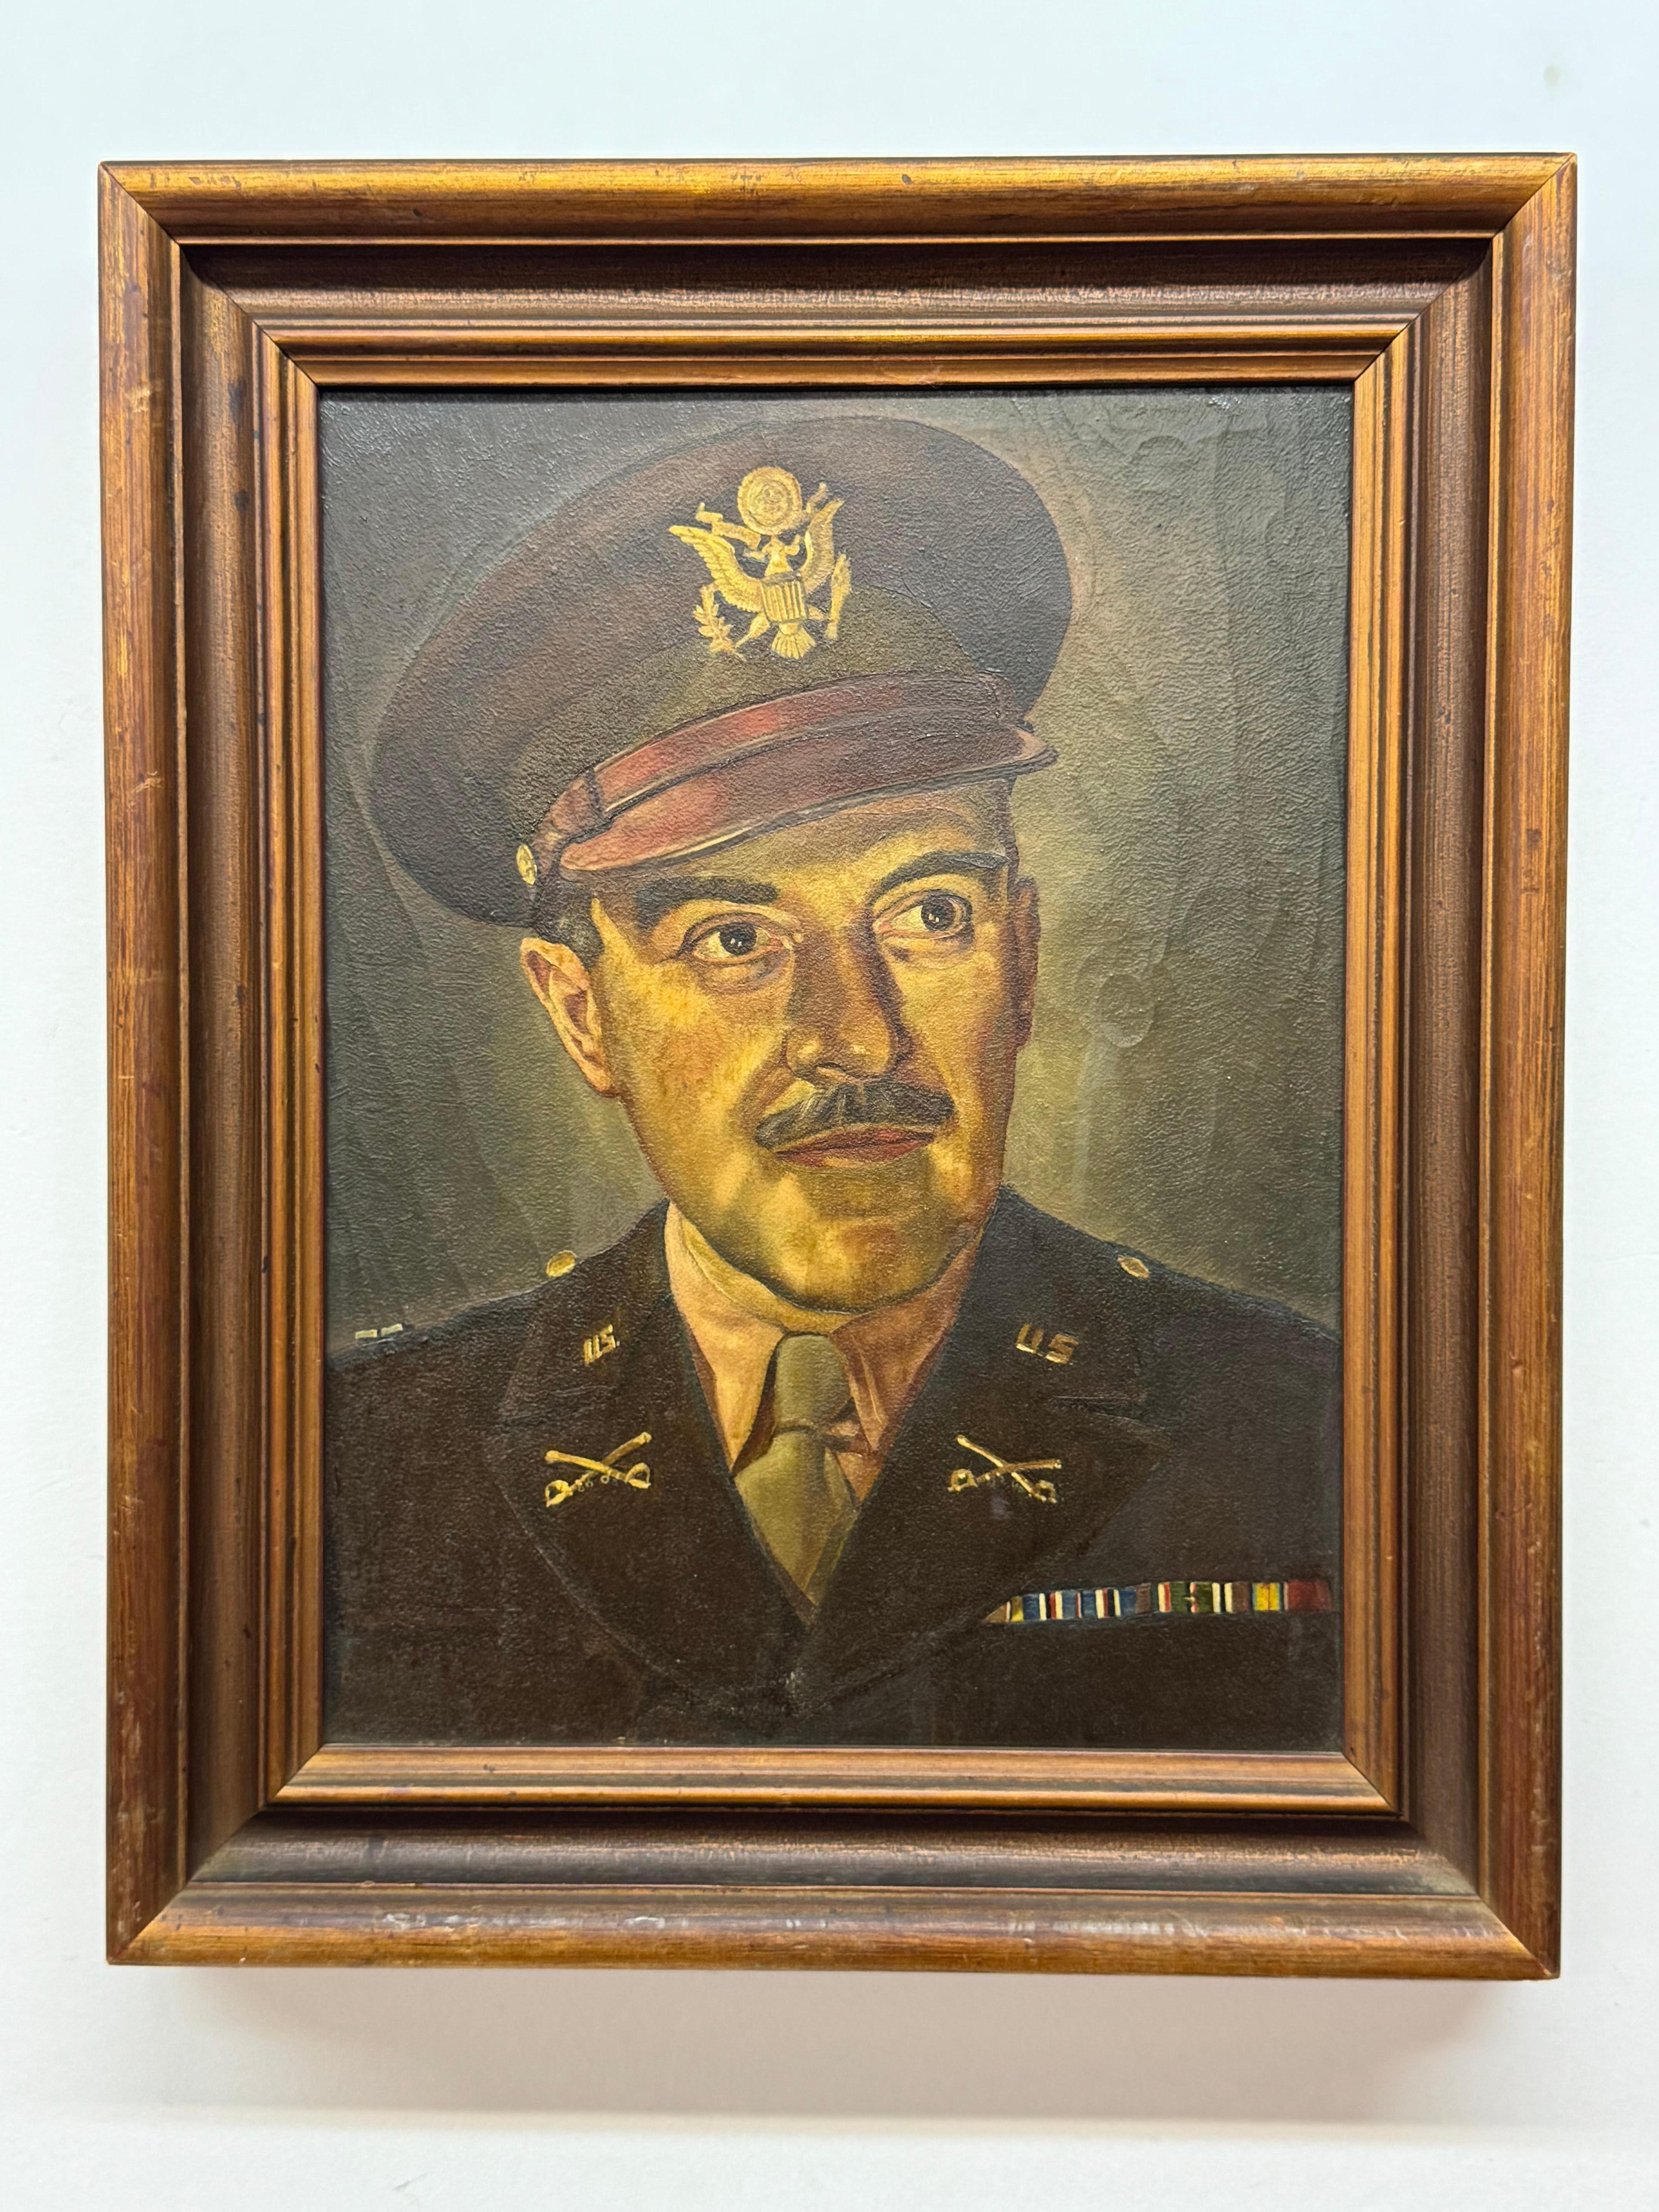 Male Portrait Painting of US Army Officer

No visible signature

Oil on canvas

10.5 x 13.75 unframed, 14x17.5  framed